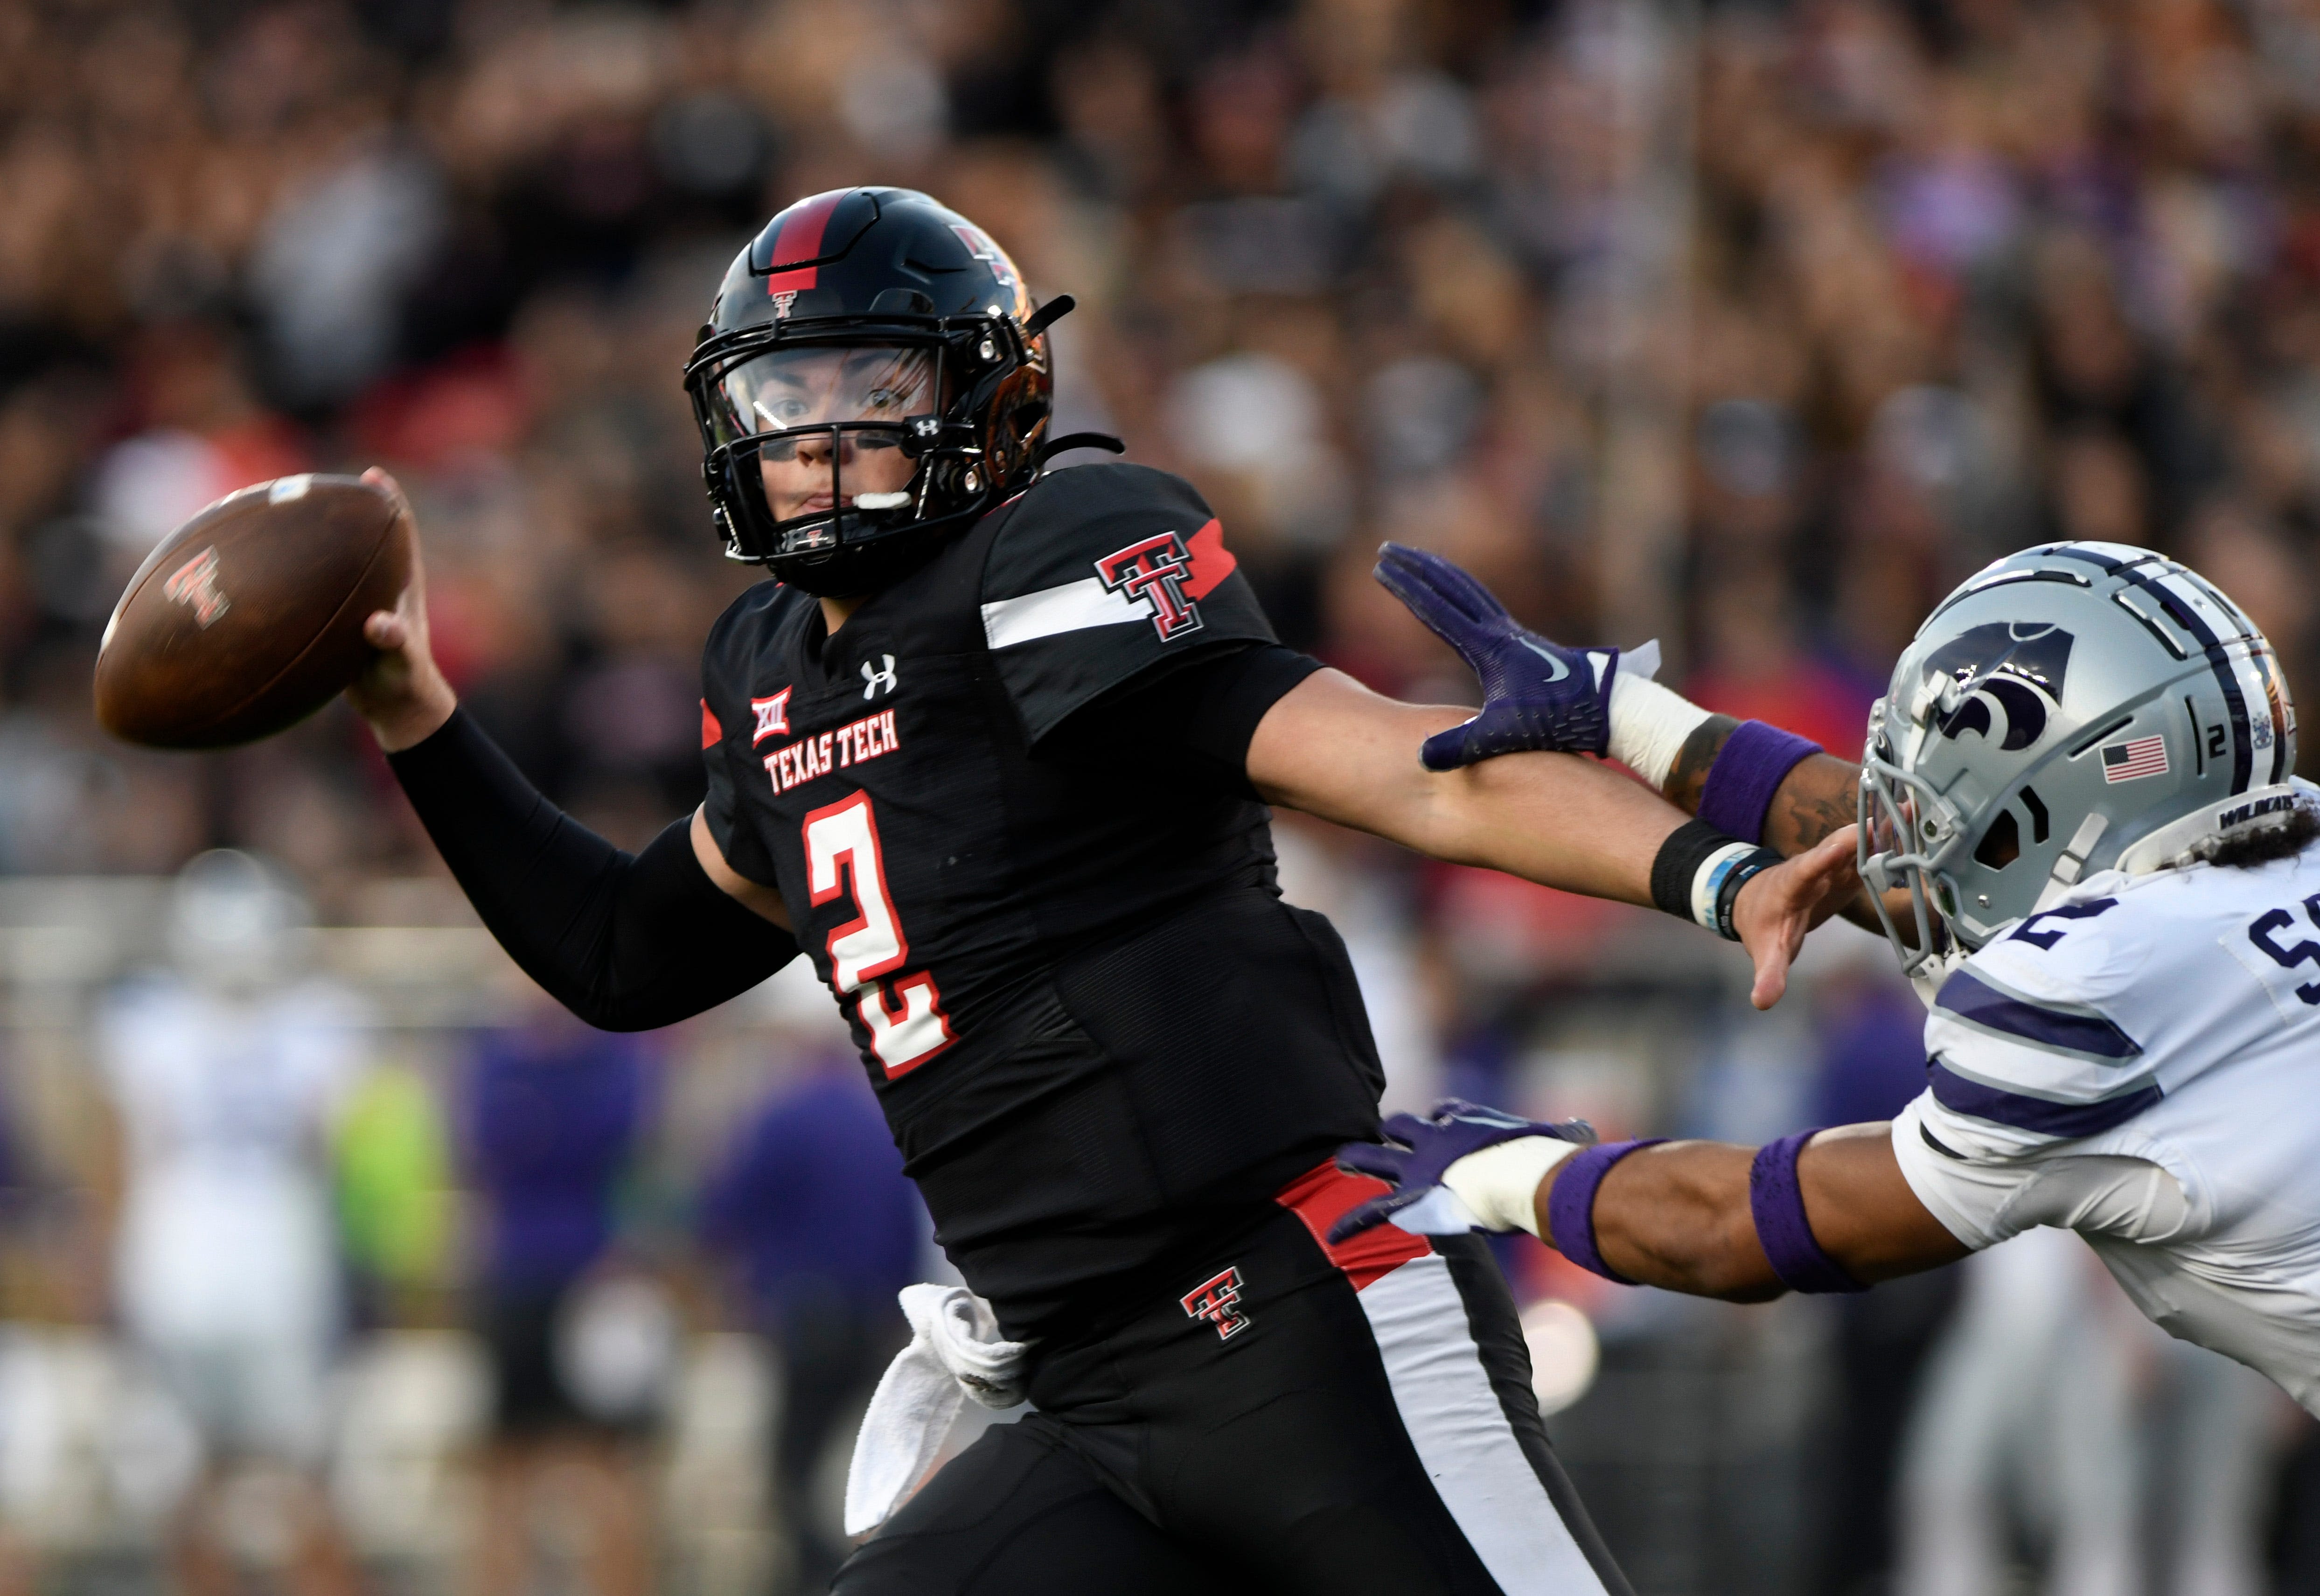 5 things to know about Texas Tech football ahead of Big 12 media days